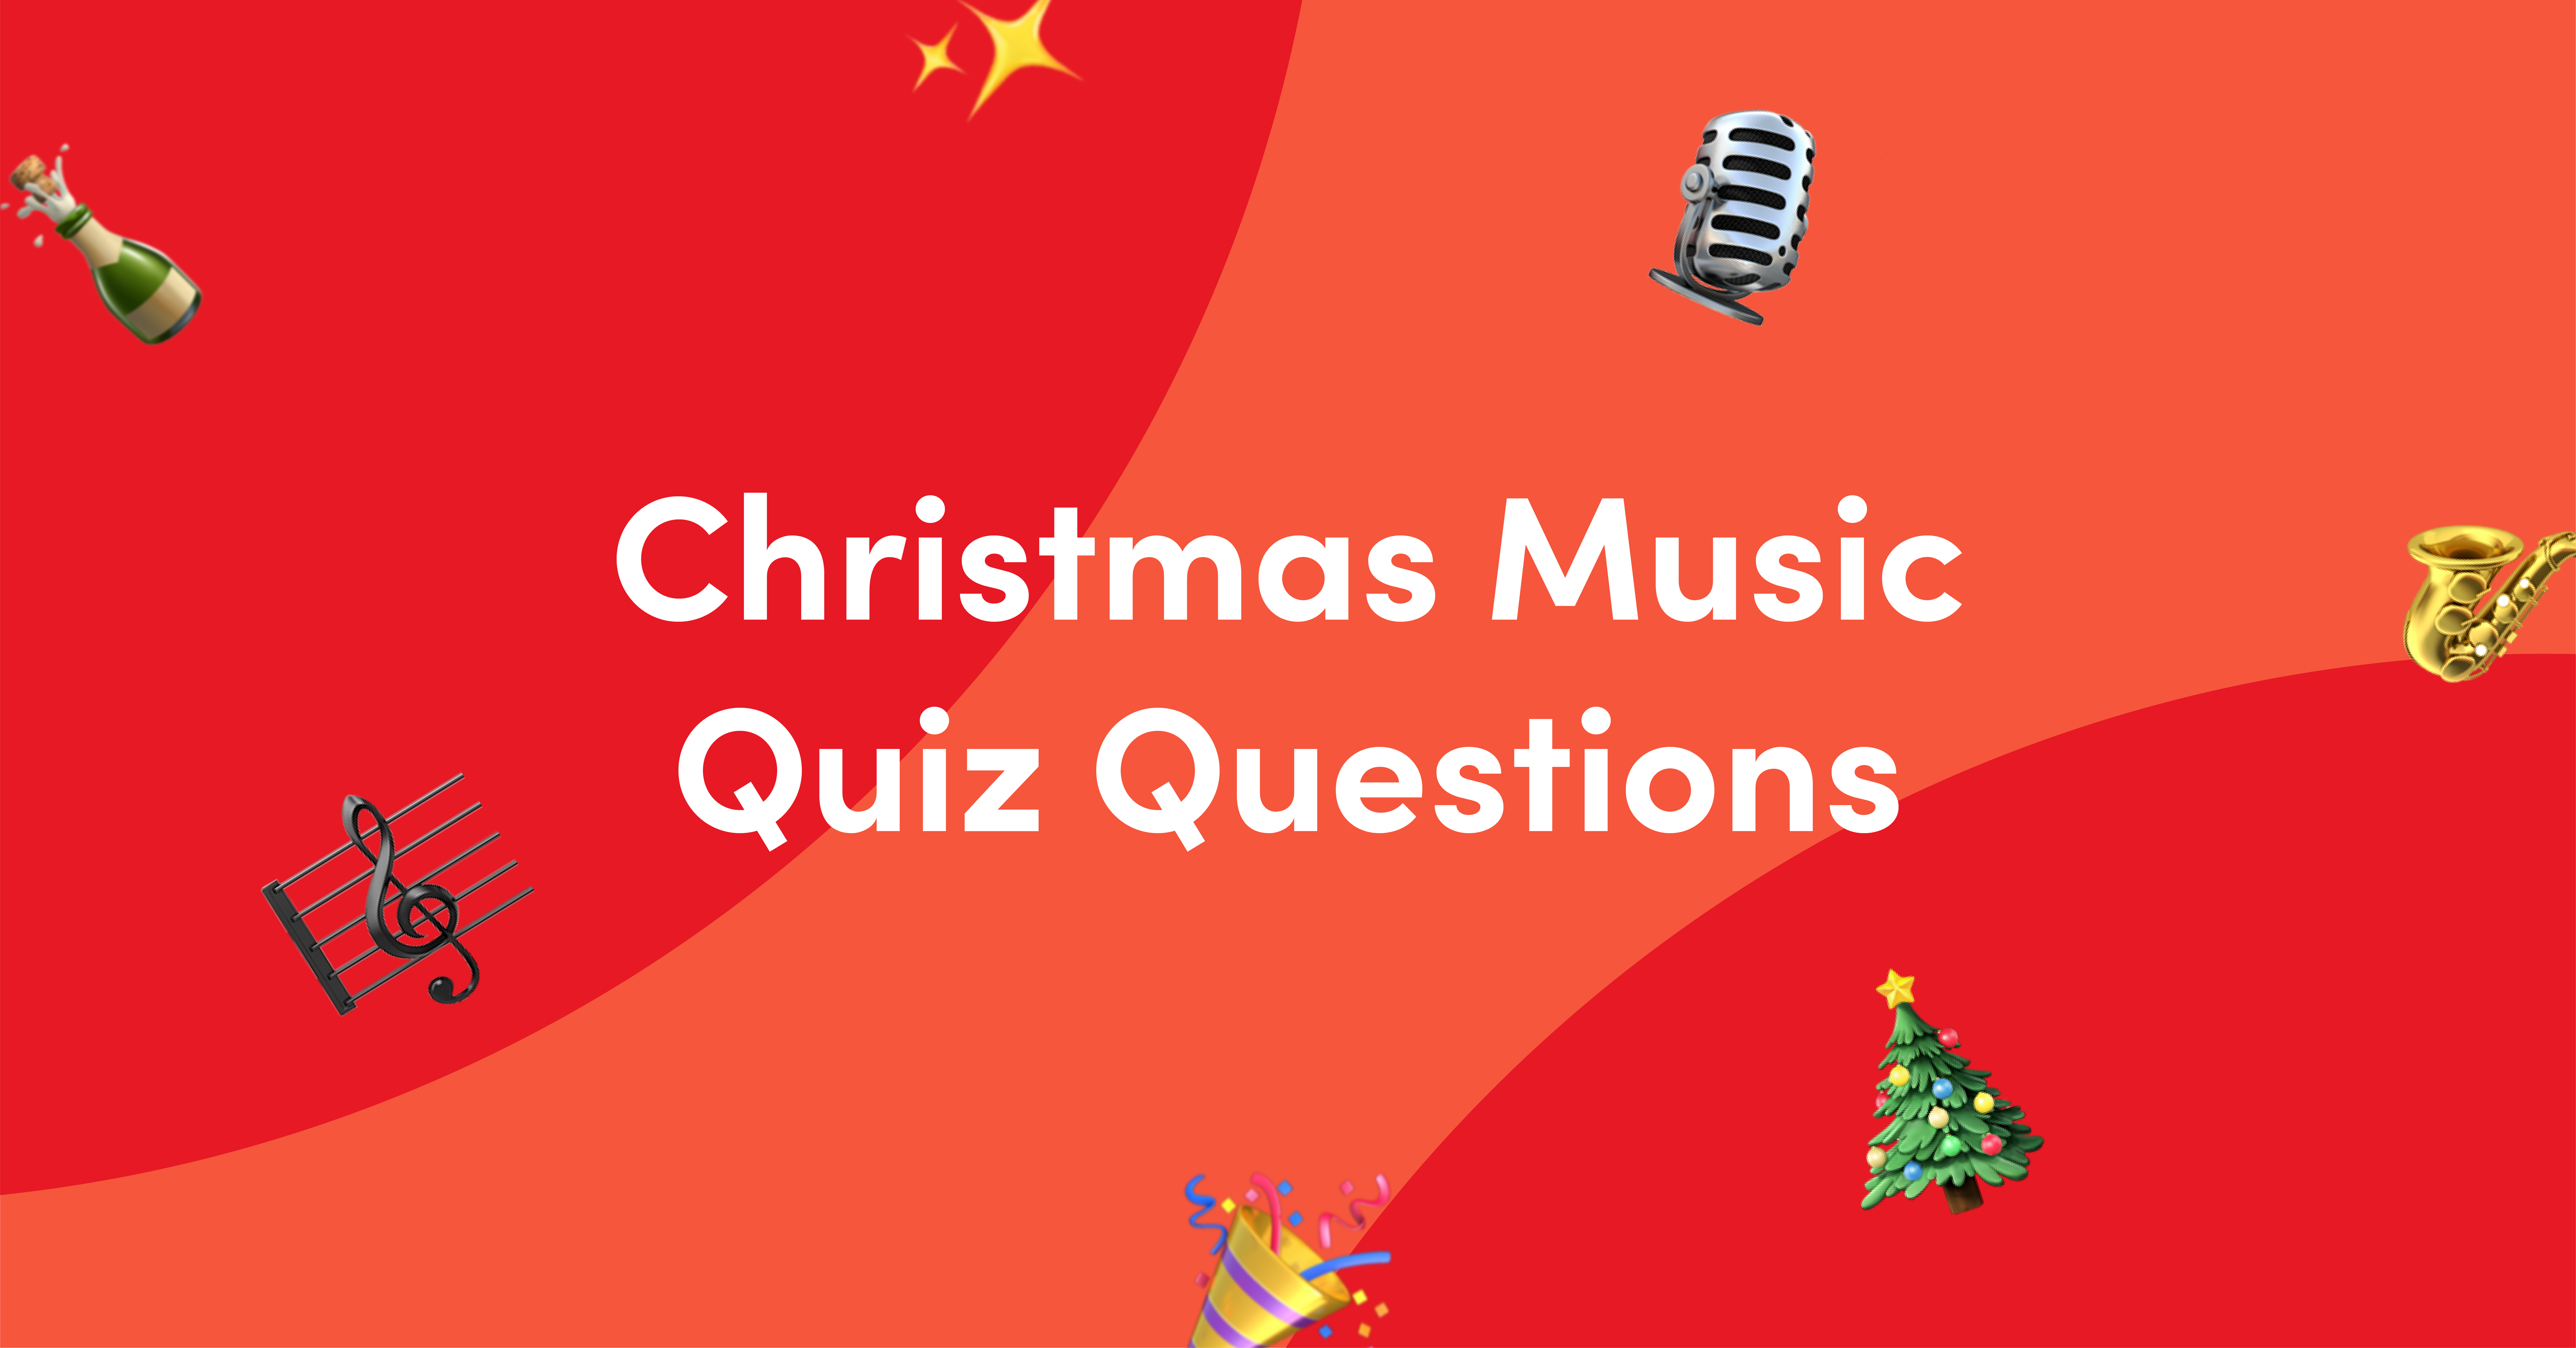 50 Christmas Music Quiz Questions and Answers